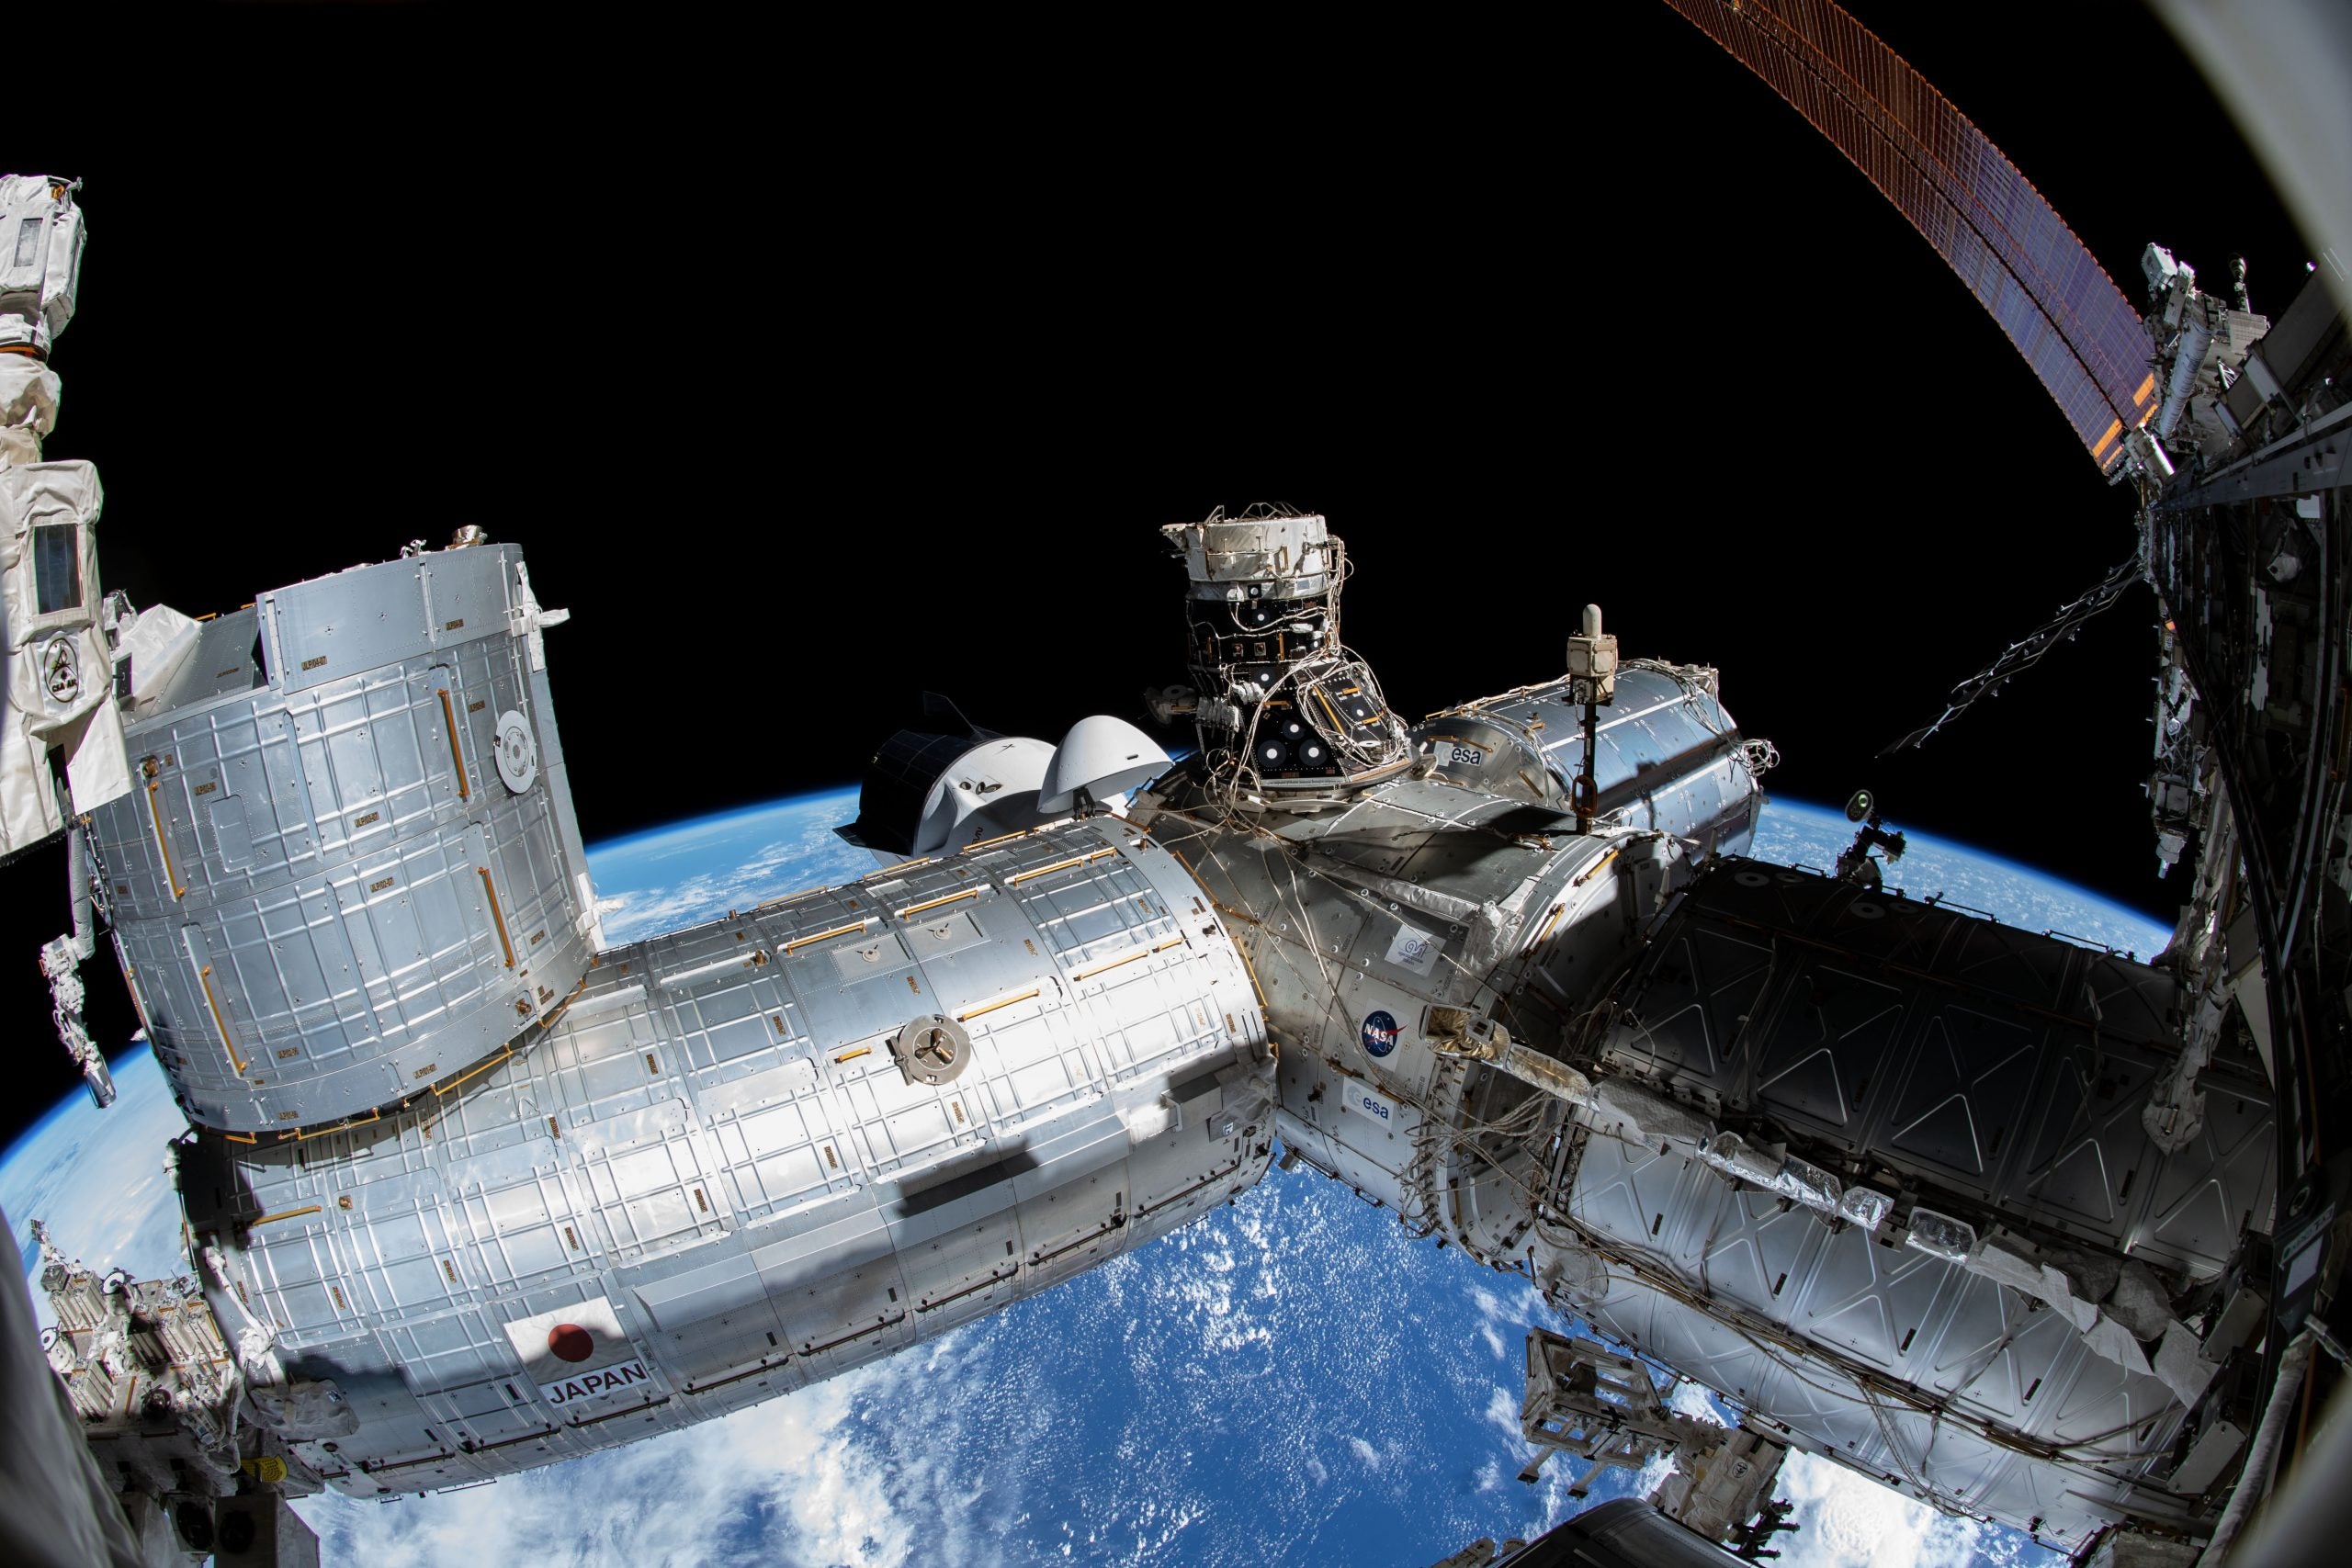 Future U.S., Russia Cooperation on ISS in the Works